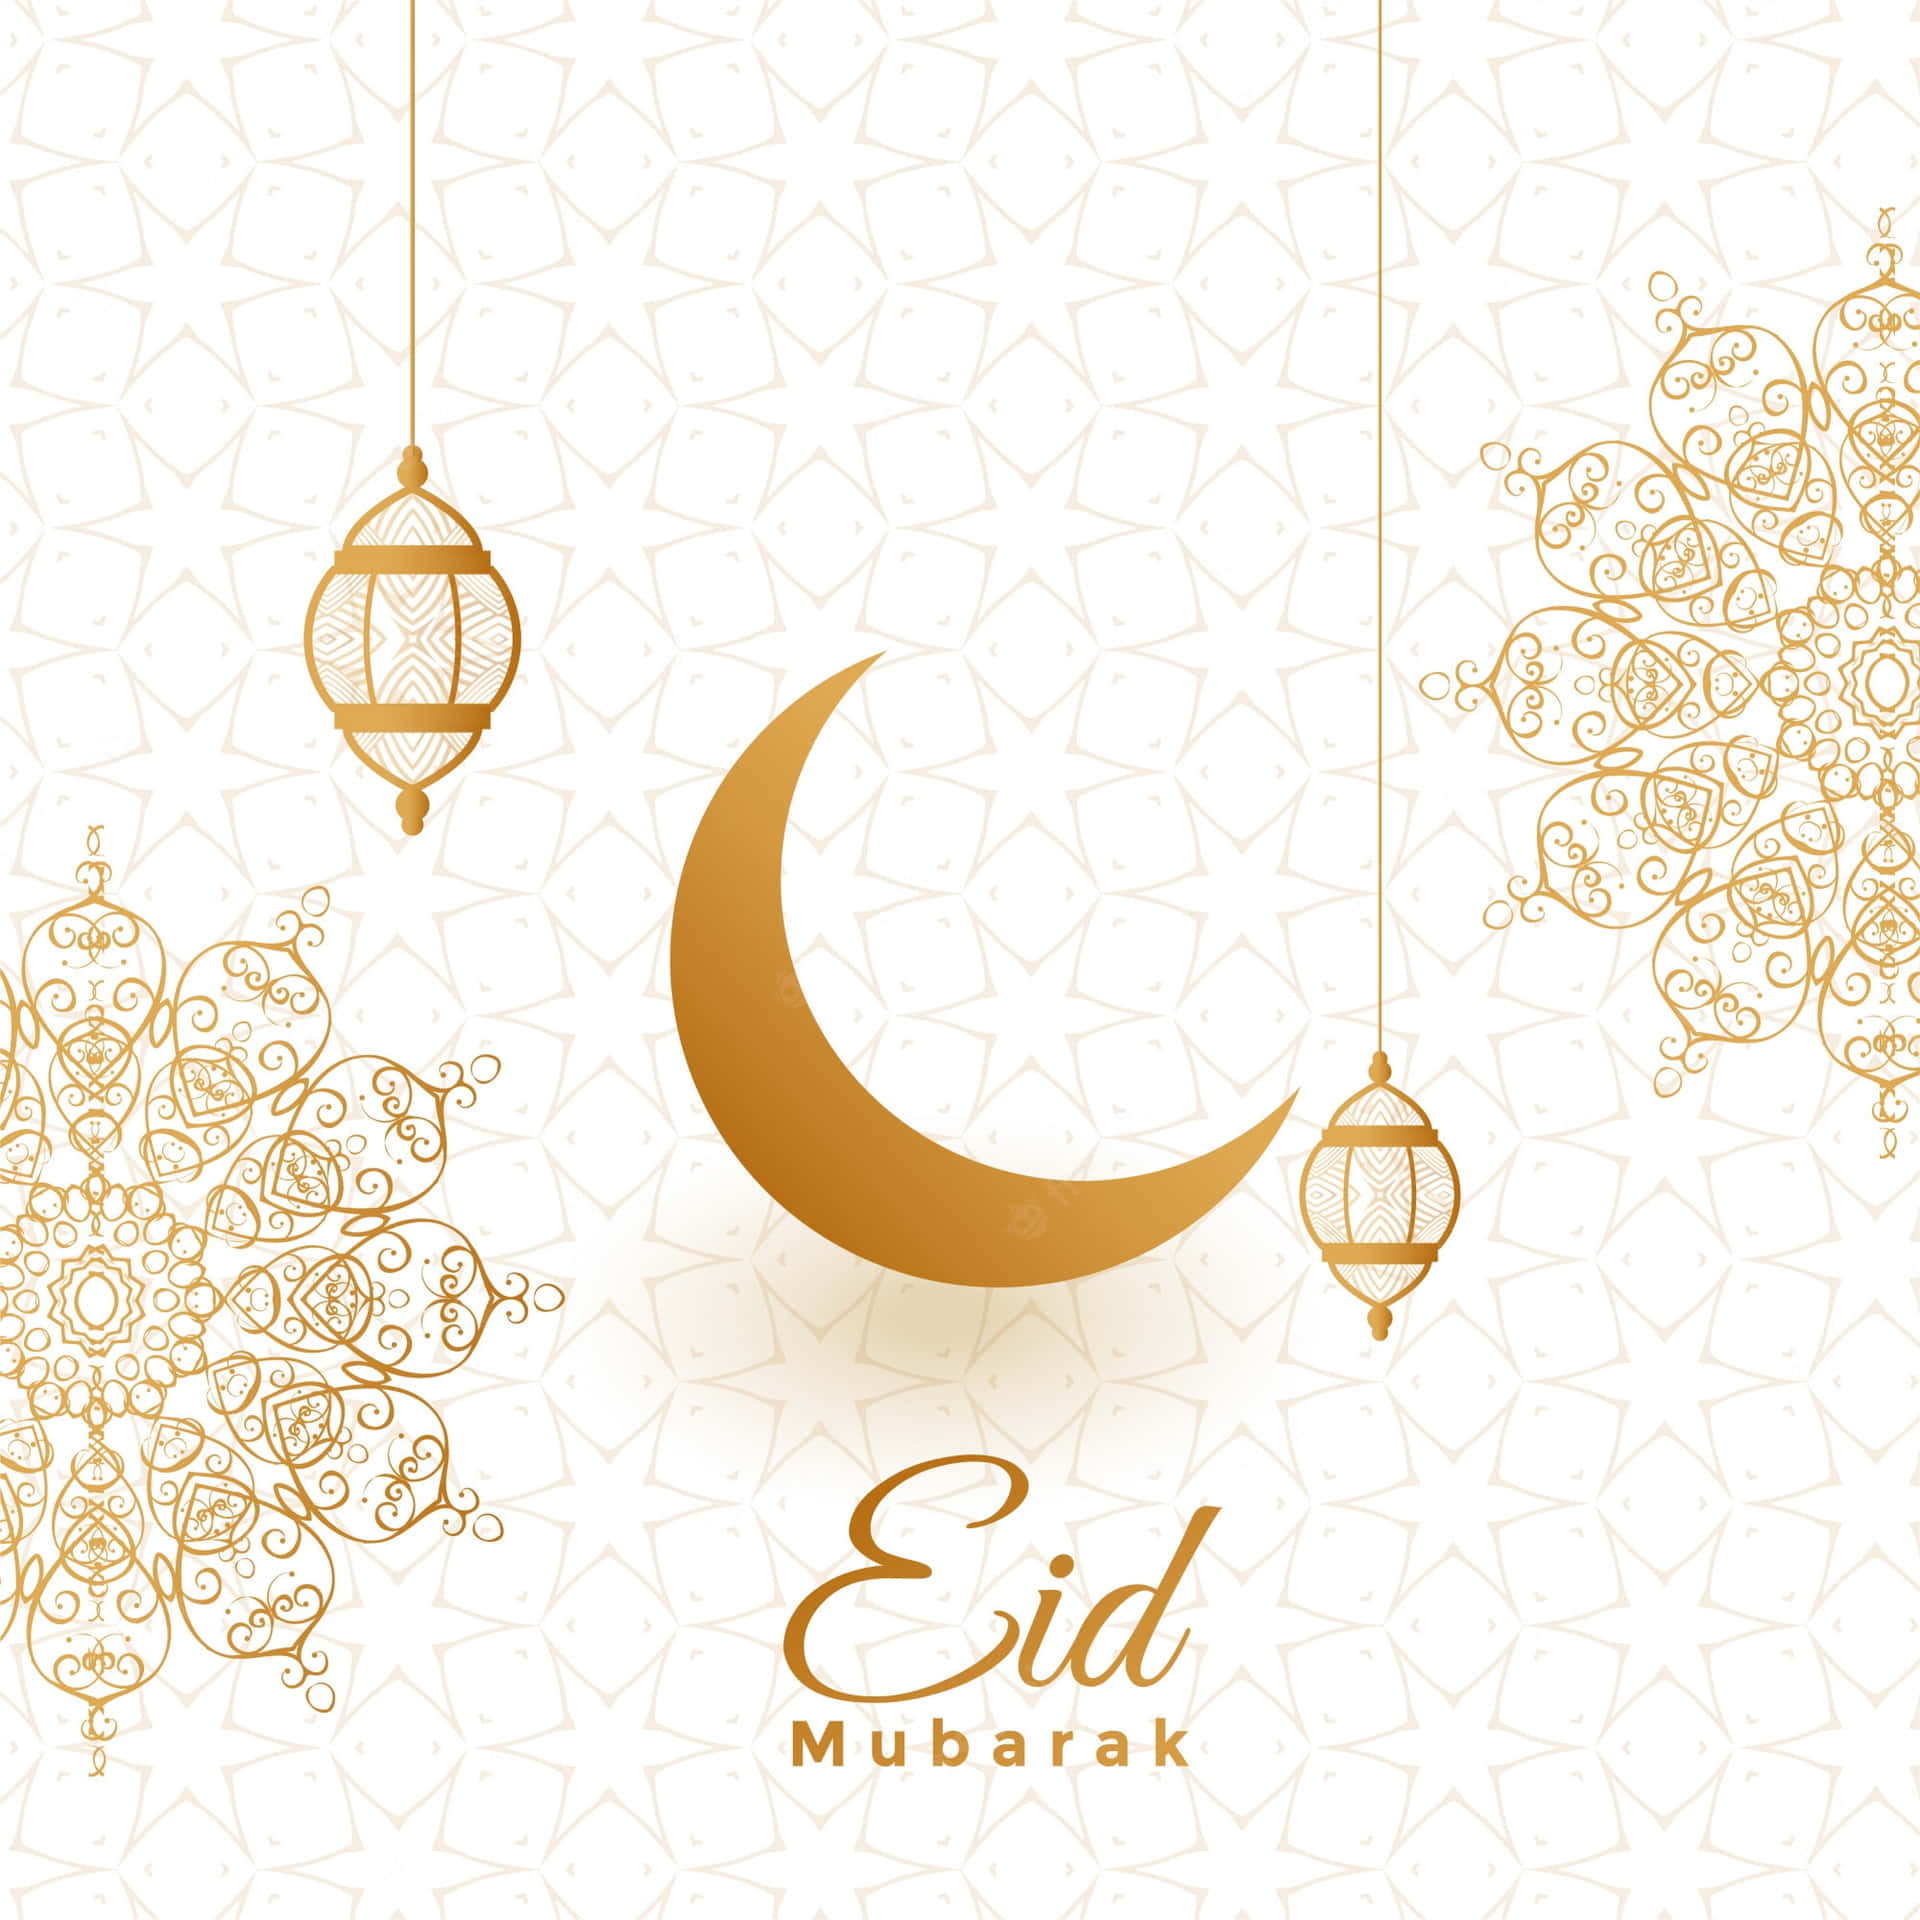 Eid Mubarak Background With A Crescent And Lanterns